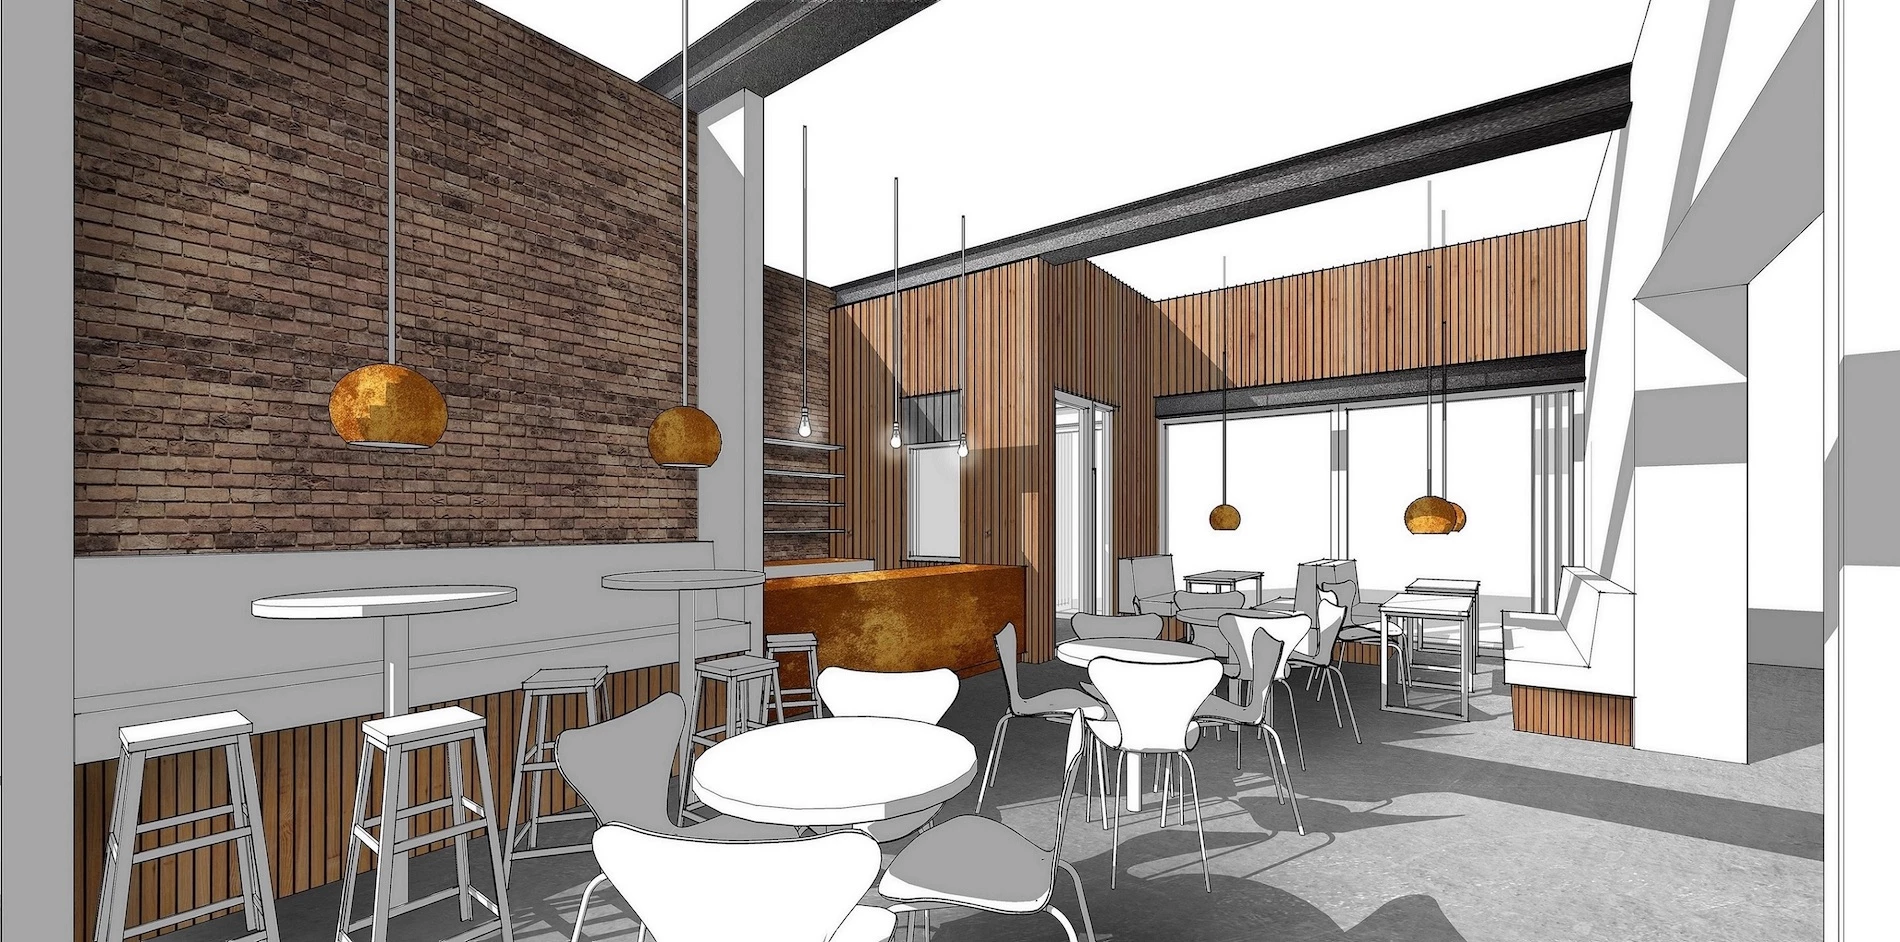 The proposed new café will be part of the complete restoration and reconfiguration of the building, creating a new hub for the creative industries in the Fruit Market.